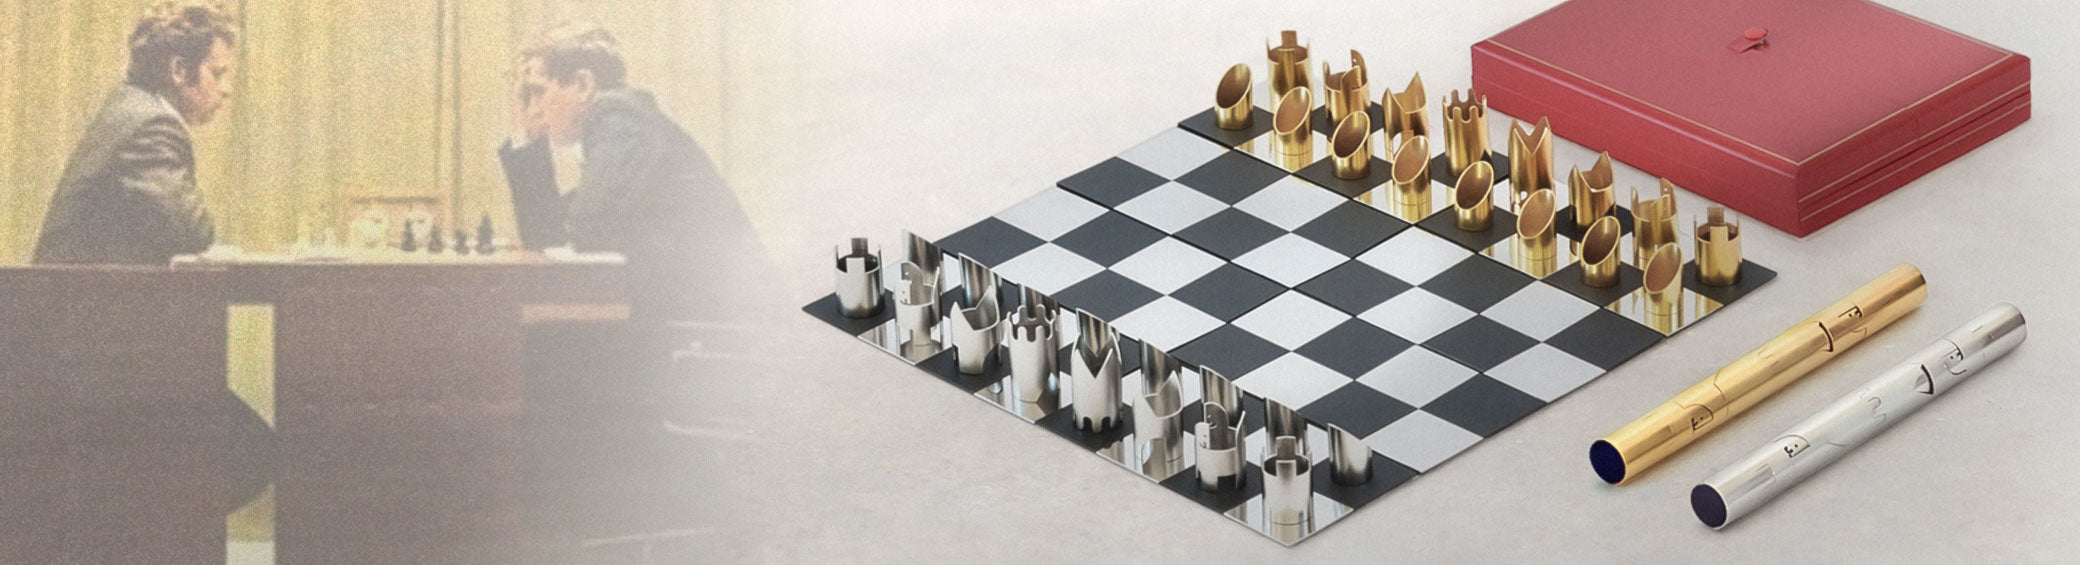 CY ENDFIELD Travel Chess Set